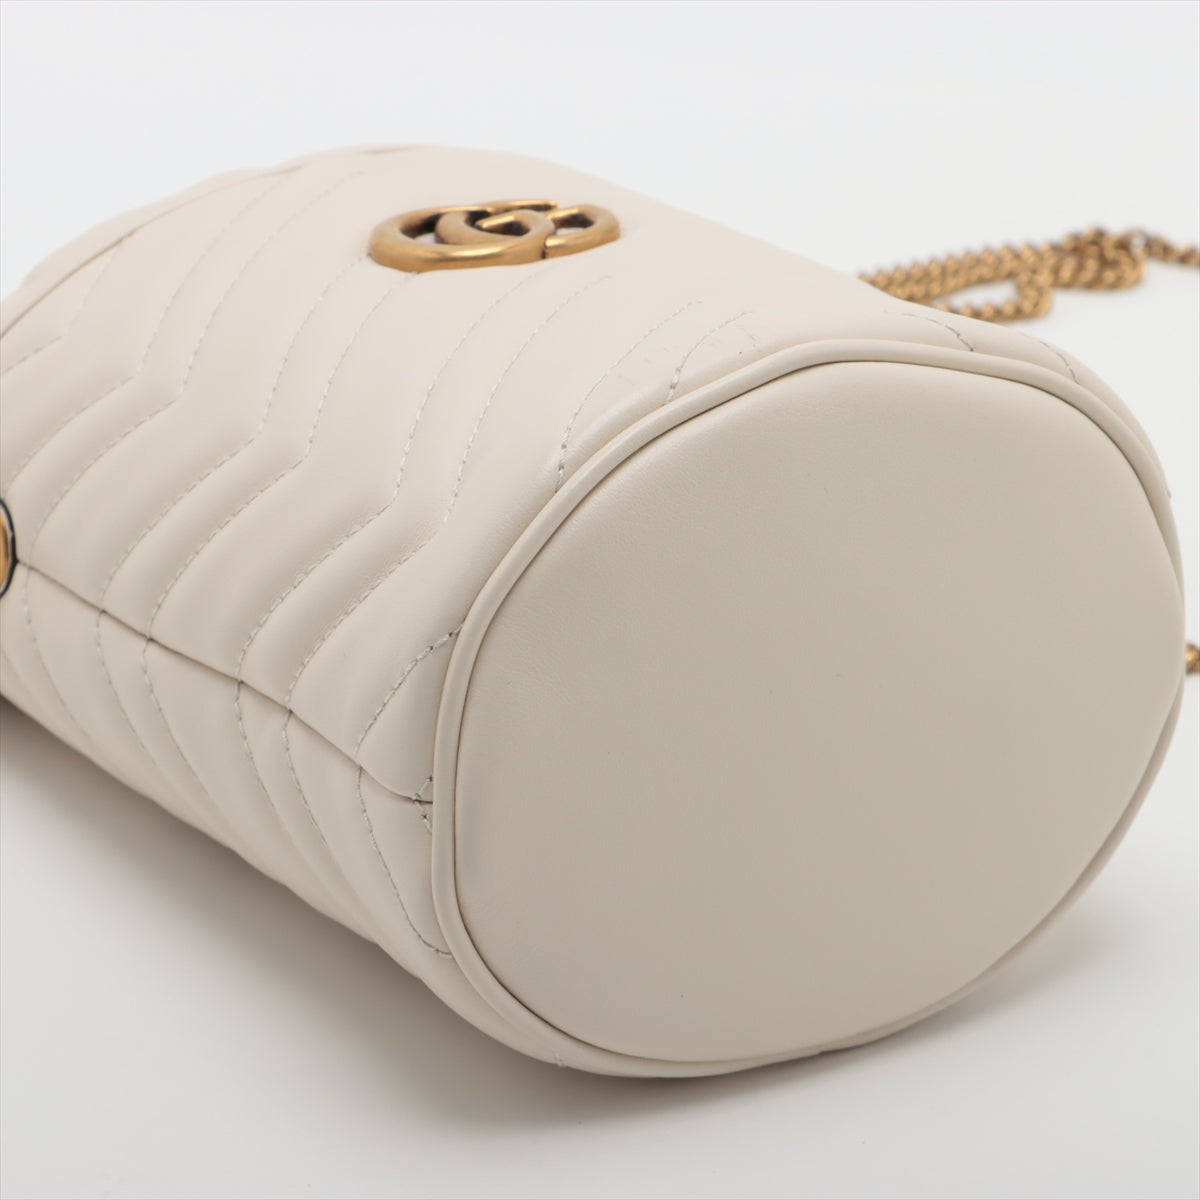 Gucci GG Marmont Leather Chain shoulder bag White 575163